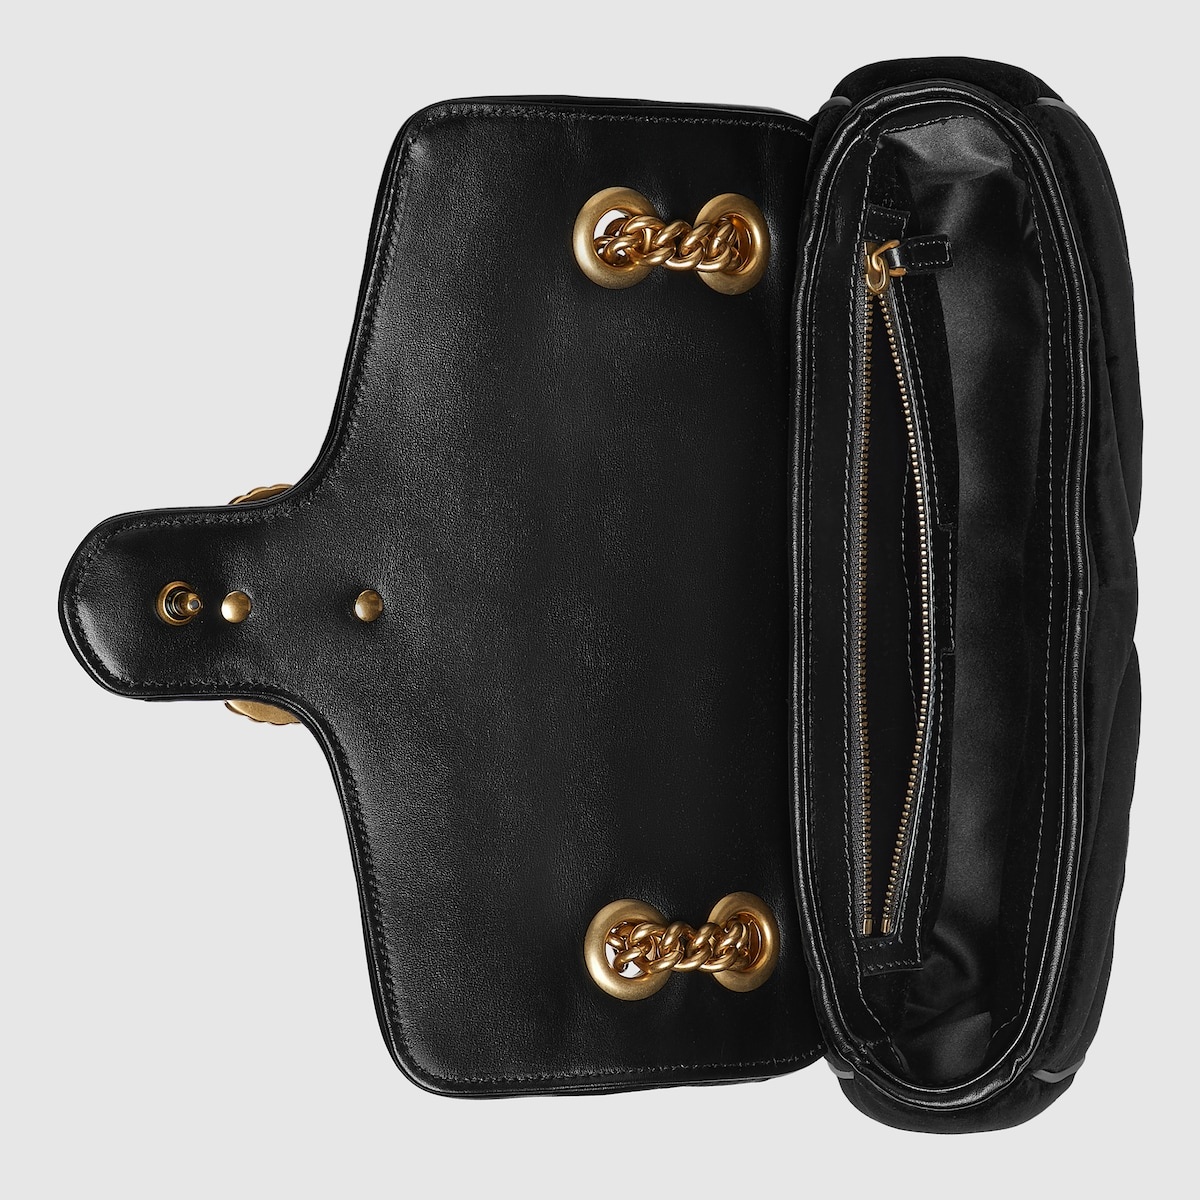 GG Marmont small shoulder bag - 7